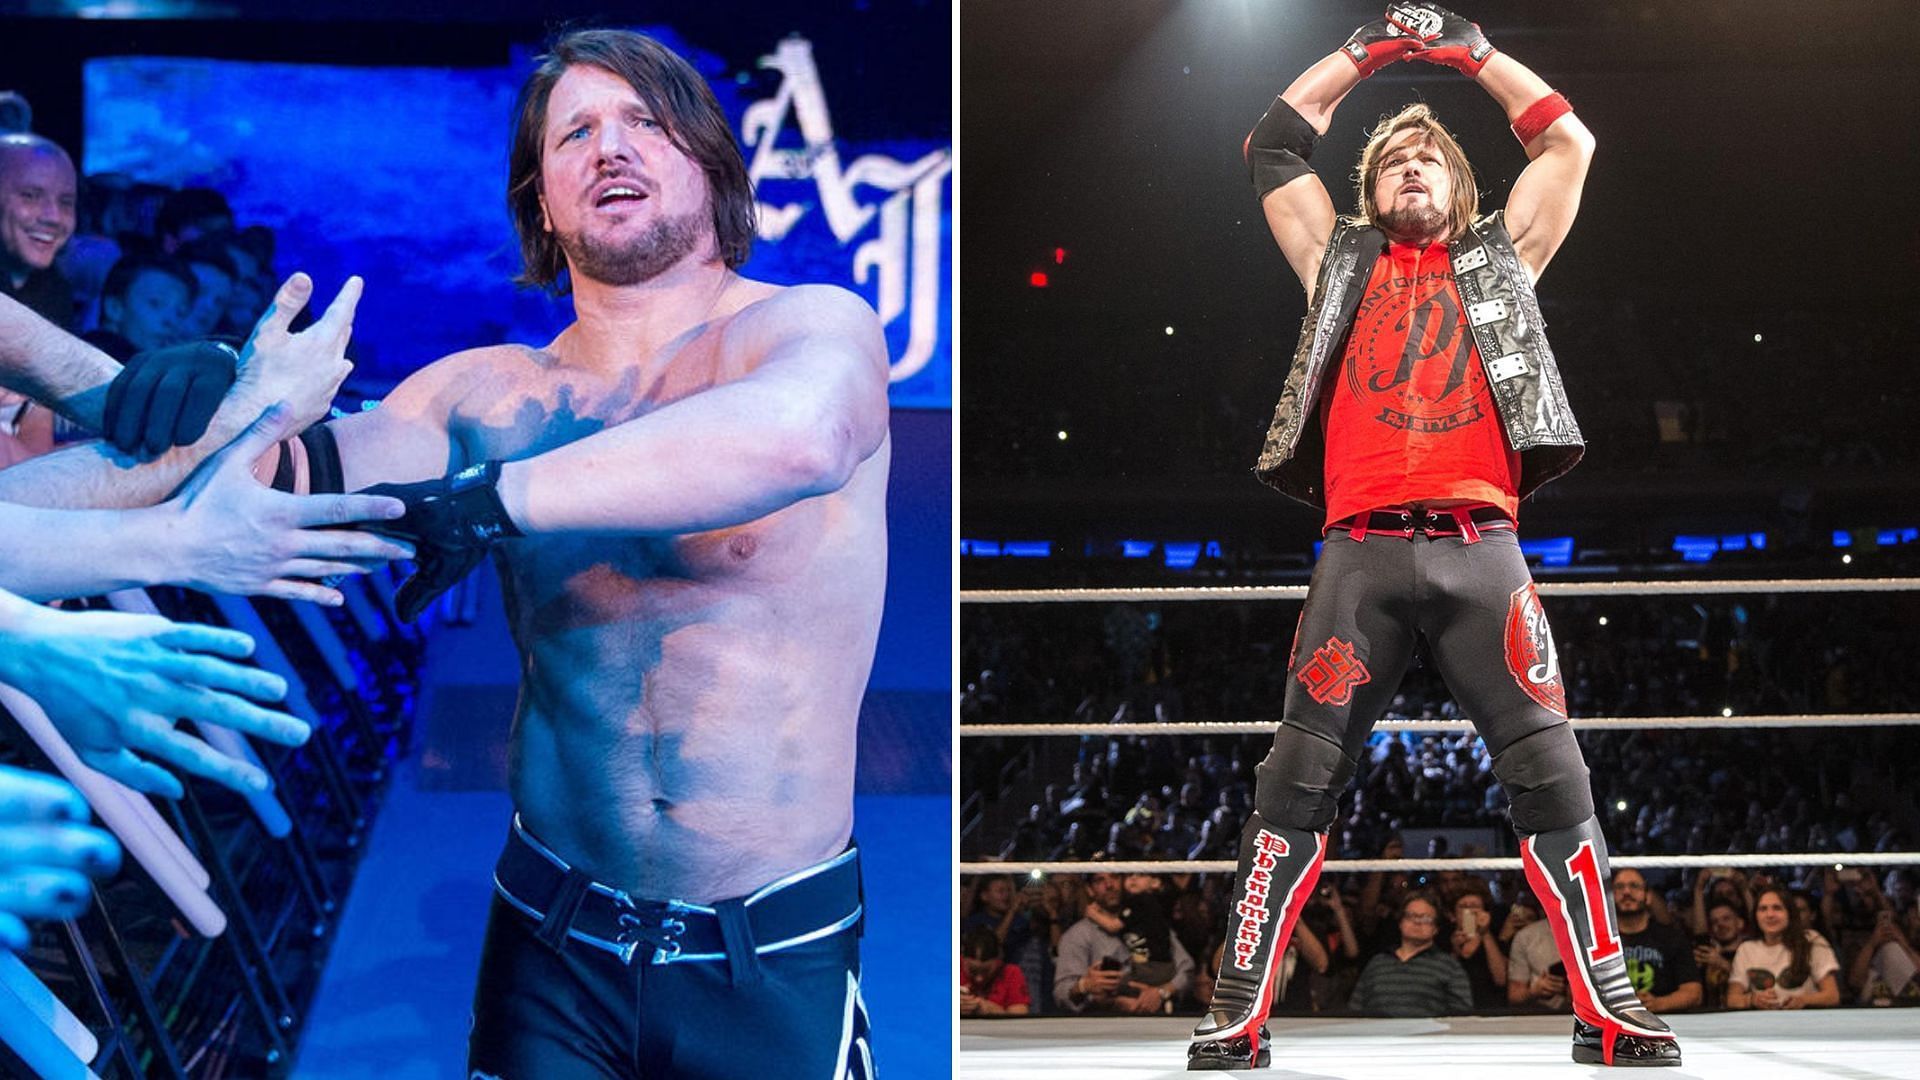 AJ Styles is one of the greatest pro-wrestlers of all-time